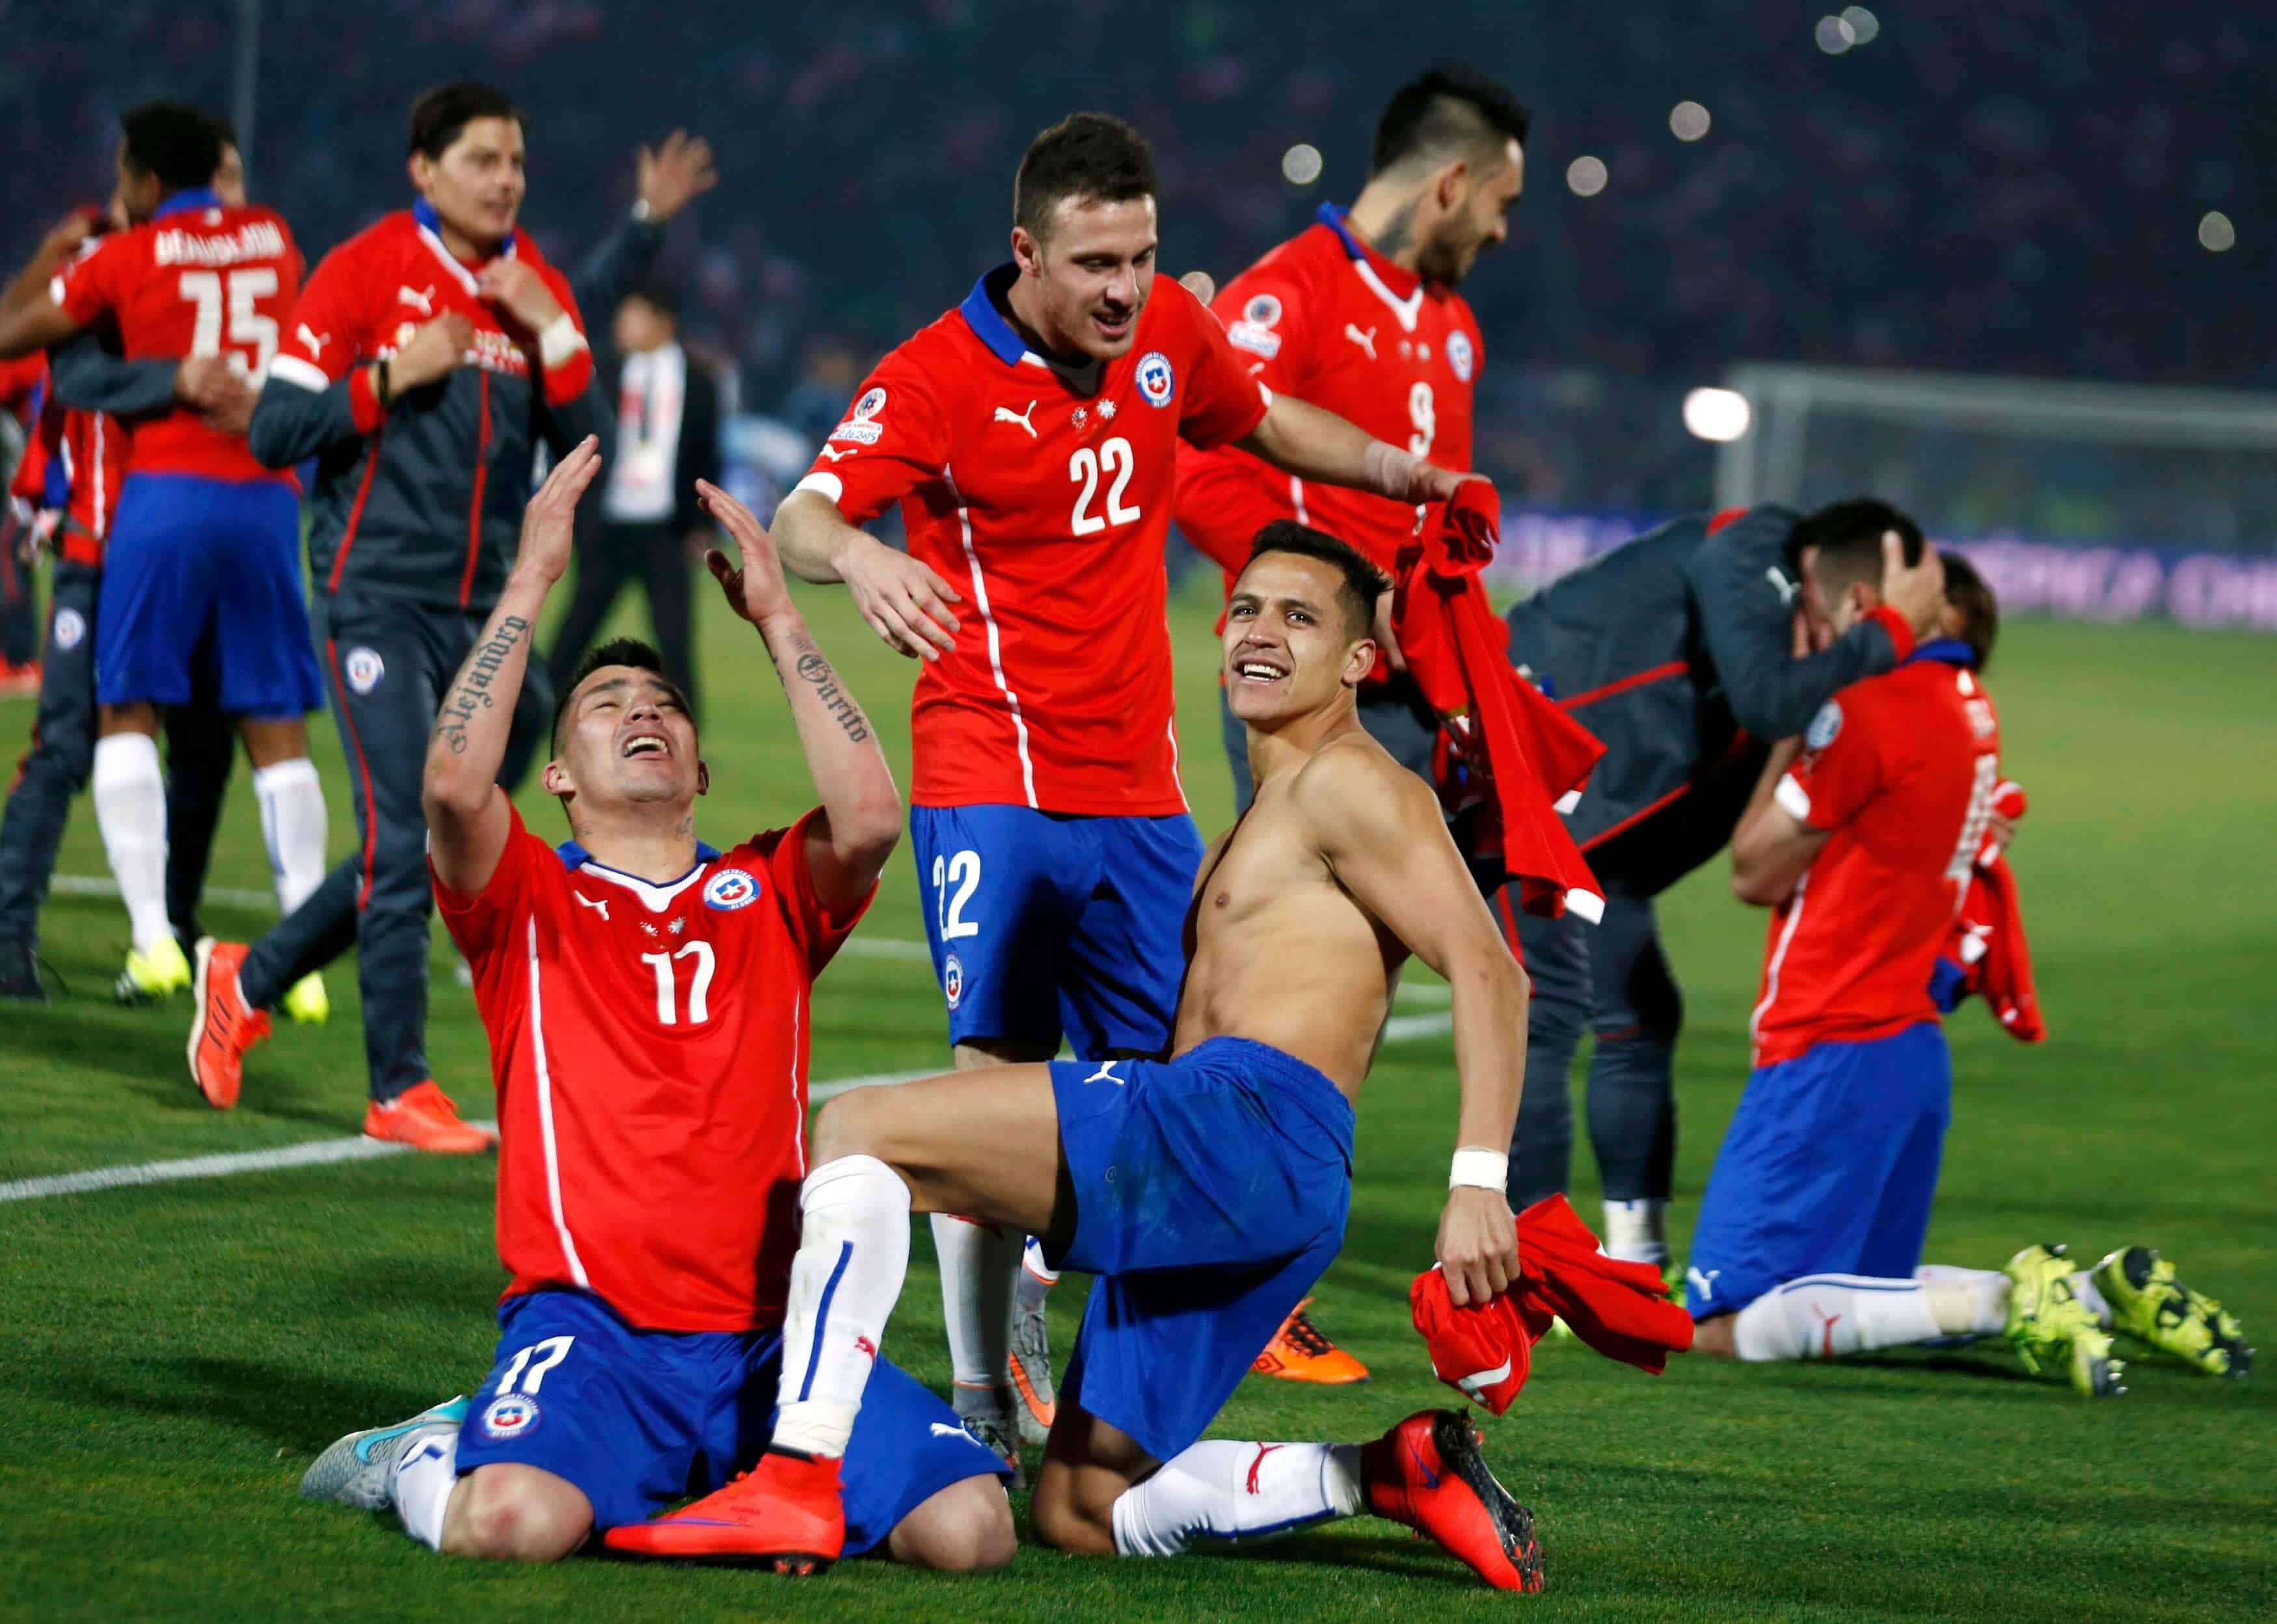 CHILE NATIONAL FC SOCCER TEAM 2019